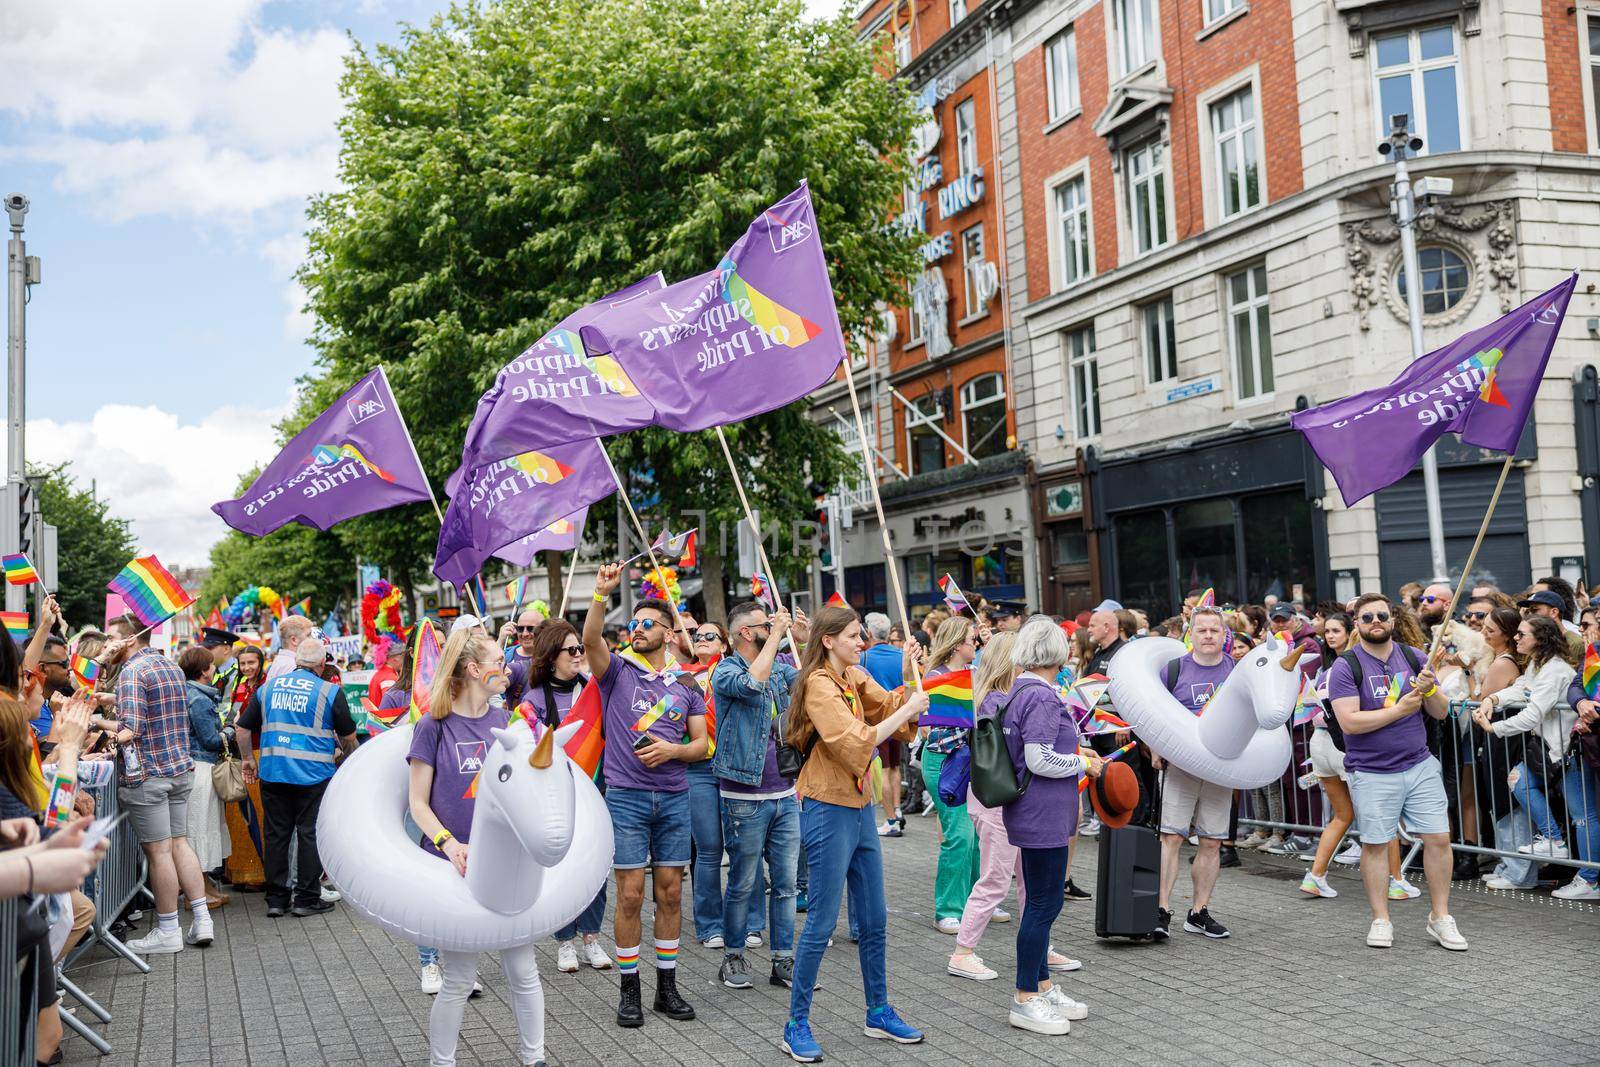 Dublin, Ireland, June 25th 2022. Ireland pride 2022 parade with people walking one one of the main city street. High quality photo